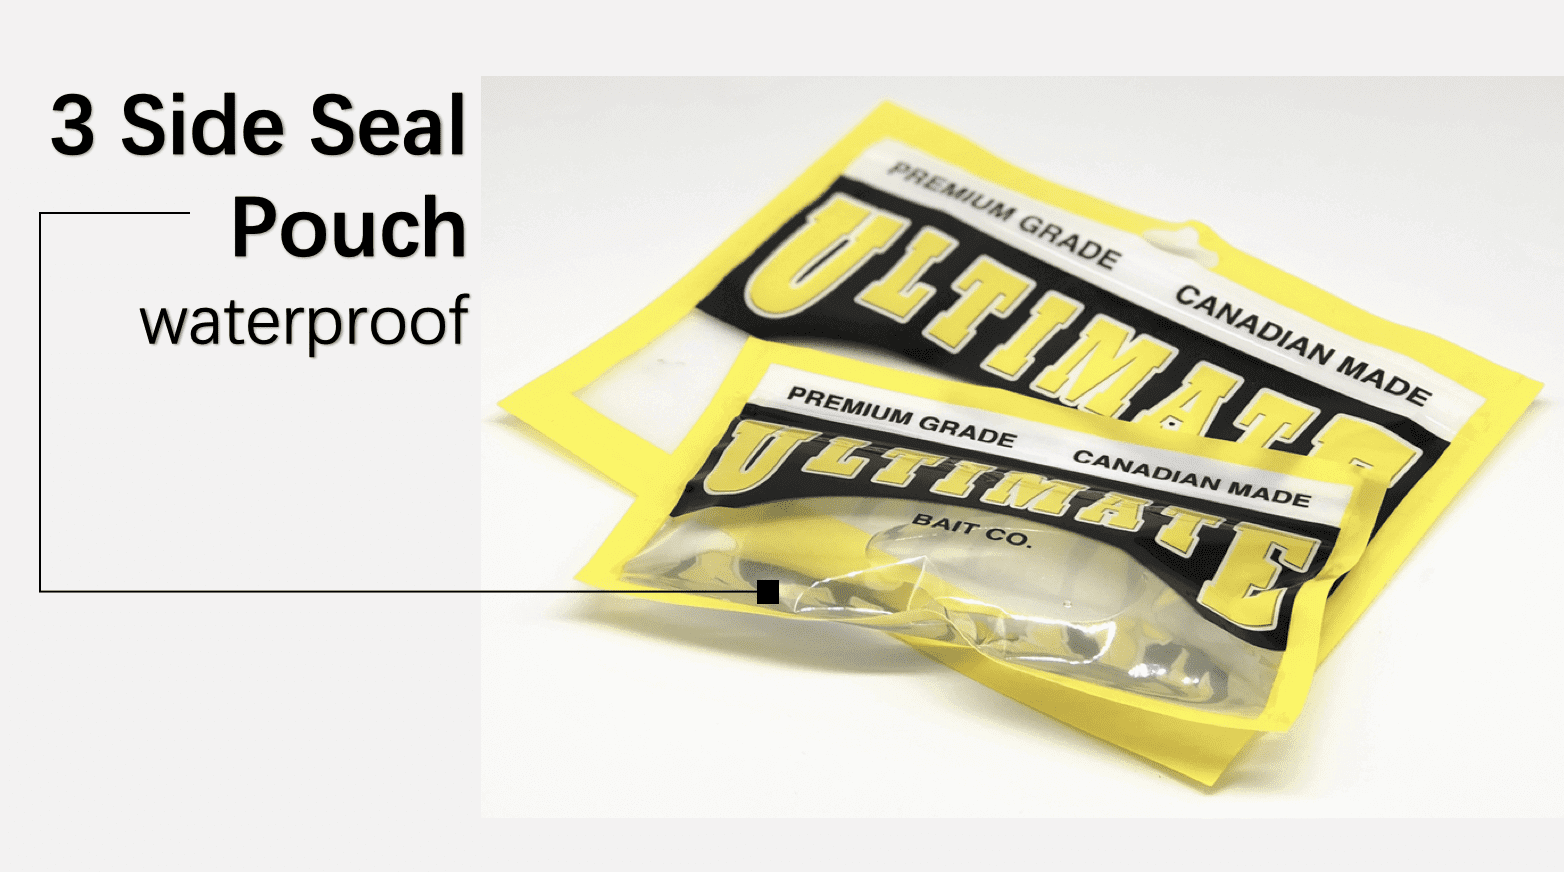 3 side seal pouch